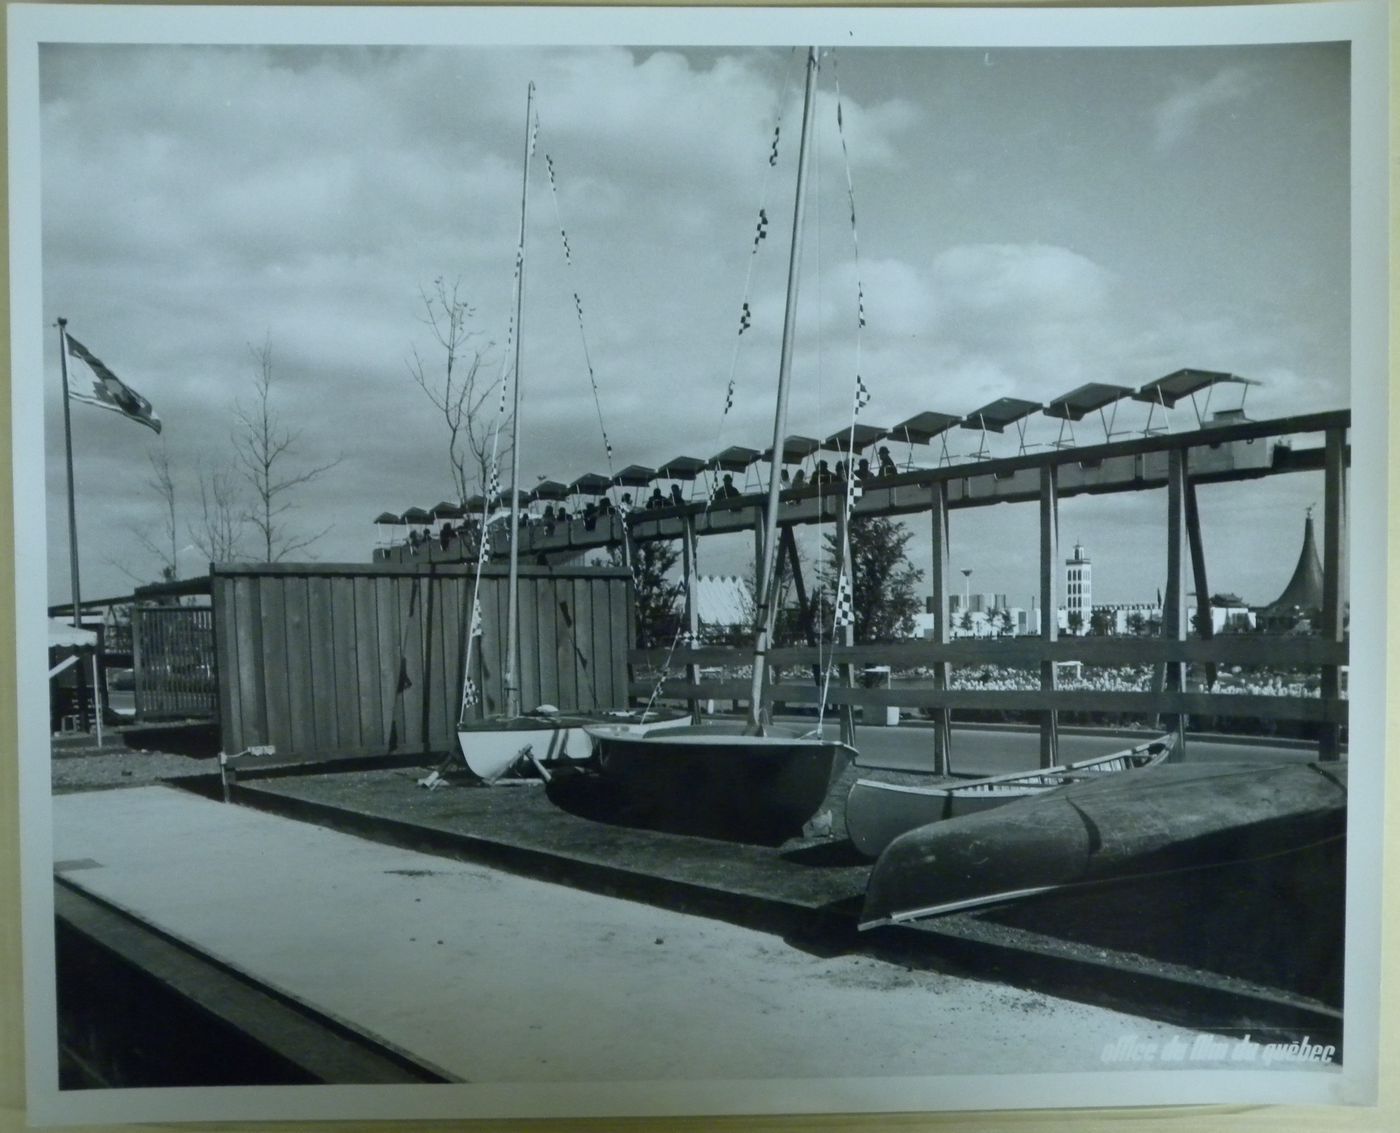 View of canoes and sailboats with the minirail in background, Expo 67, Montréal, Québec